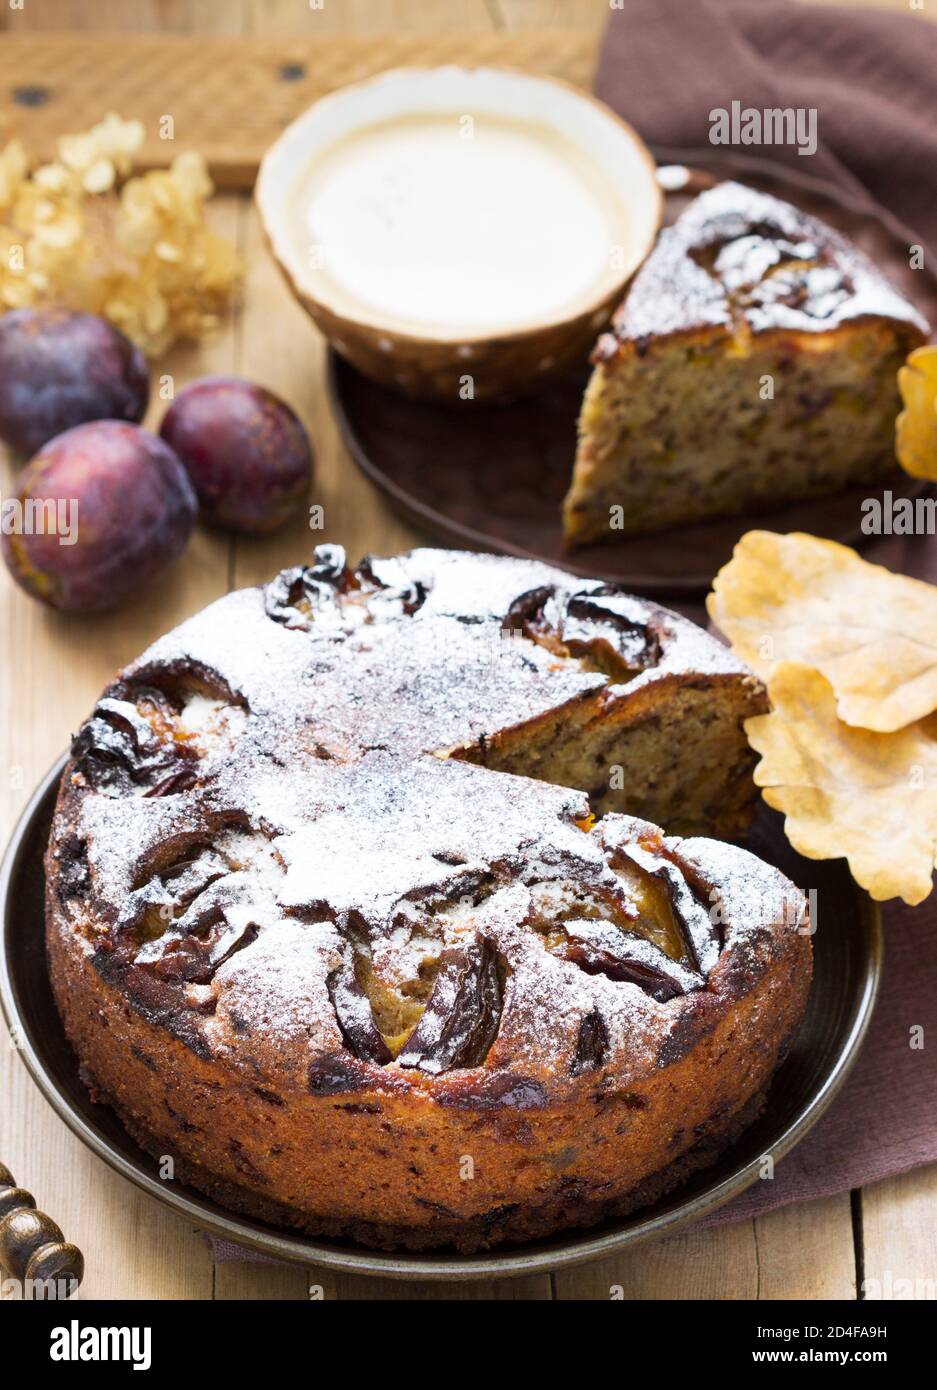 Plum pie with nuts and chocolate on a wooden background. Rustic style. Stock Photo